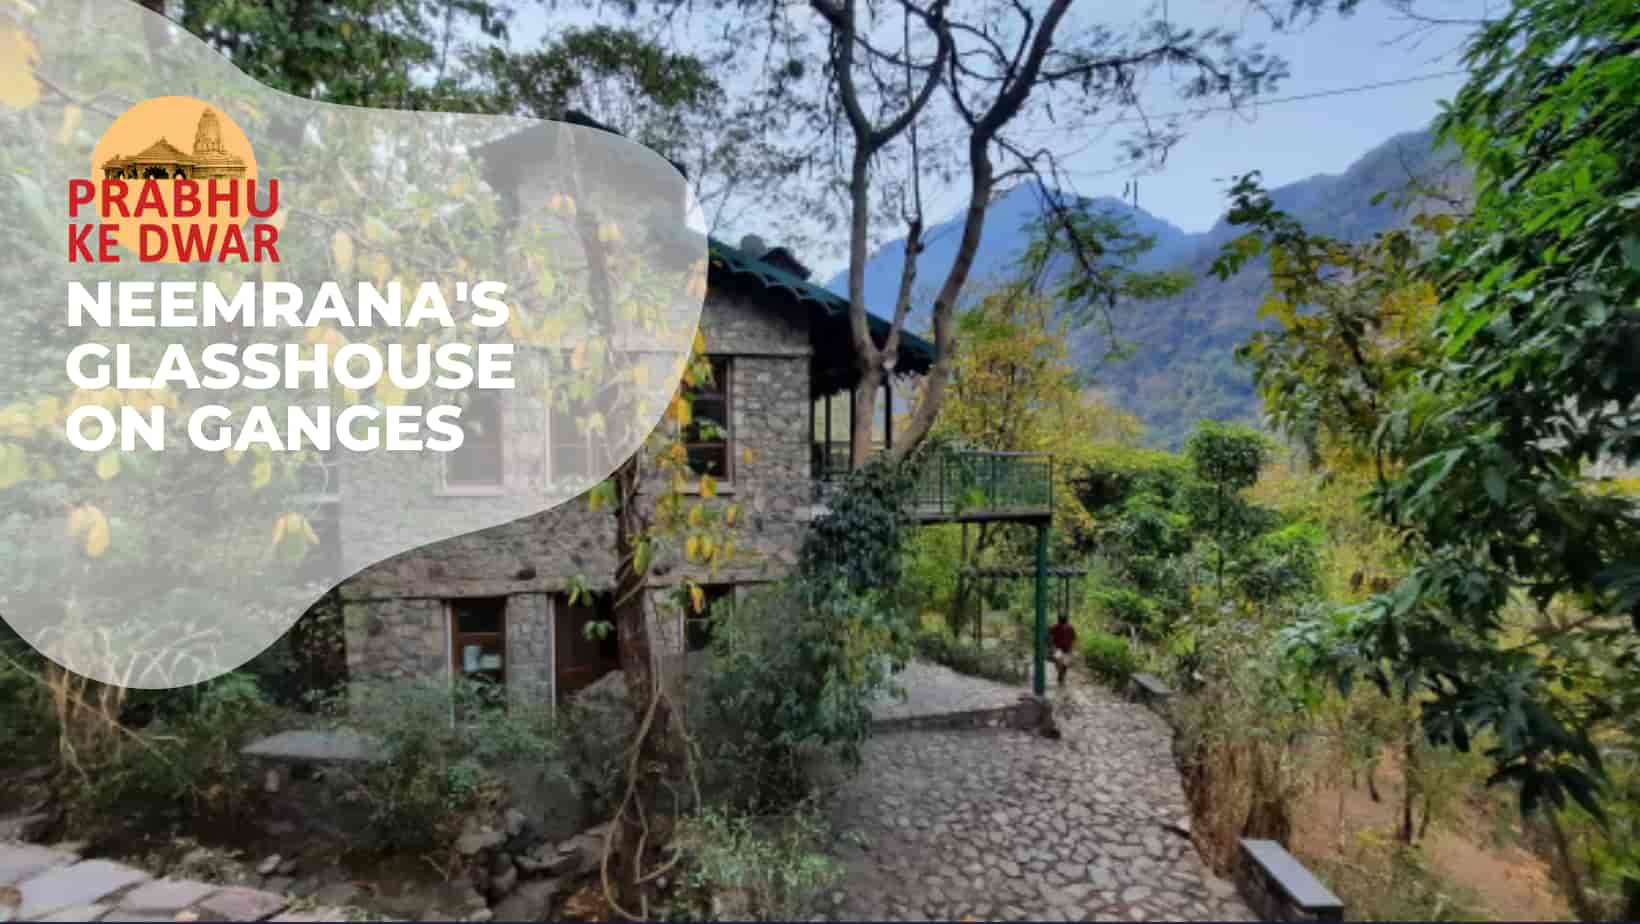 Experience Tranquility at Neemrana's Glasshouse on Ganges